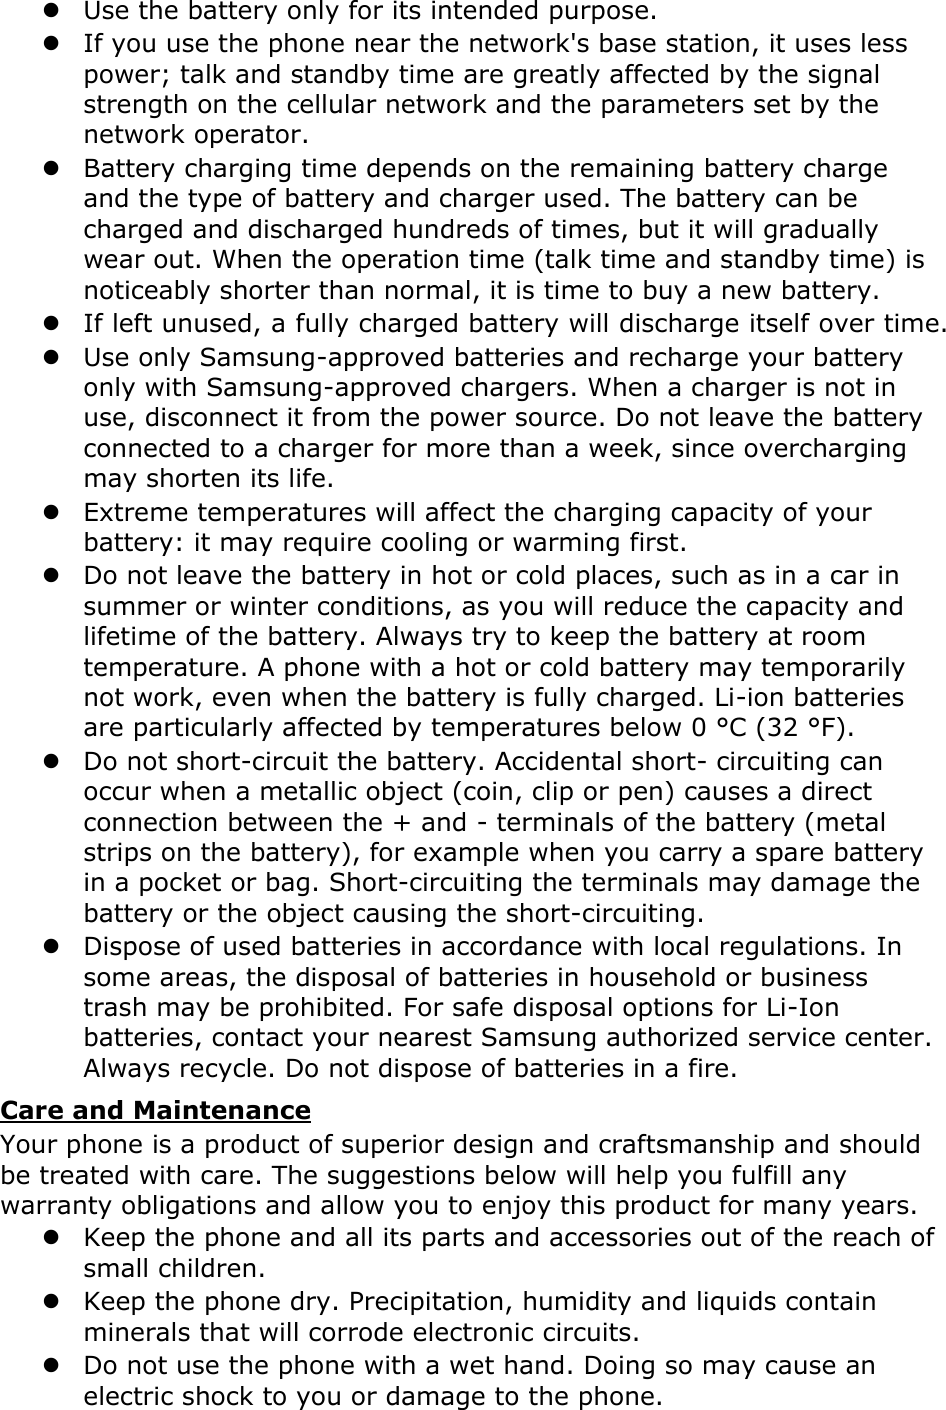  Use the battery only for its intended purpose.  If you use the phone near the network&apos;s base station, it uses less power; talk and standby time are greatly affected by the signal strength on the cellular network and the parameters set by the network operator.  Battery charging time depends on the remaining battery charge and the type of battery and charger used. The battery can be charged and discharged hundreds of times, but it will gradually wear out. When the operation time (talk time and standby time) is noticeably shorter than normal, it is time to buy a new battery.  If left unused, a fully charged battery will discharge itself over time.  Use only Samsung-approved batteries and recharge your battery only with Samsung-approved chargers. When a charger is not in use, disconnect it from the power source. Do not leave the battery connected to a charger for more than a week, since overcharging may shorten its life.  Extreme temperatures will affect the charging capacity of your battery: it may require cooling or warming first.  Do not leave the battery in hot or cold places, such as in a car in summer or winter conditions, as you will reduce the capacity and lifetime of the battery. Always try to keep the battery at room temperature. A phone with a hot or cold battery may temporarily not work, even when the battery is fully charged. Li-ion batteries are particularly affected by temperatures below 0 °C (32 °F).  Do not short-circuit the battery. Accidental short- circuiting can occur when a metallic object (coin, clip or pen) causes a direct connection between the + and - terminals of the battery (metal strips on the battery), for example when you carry a spare battery in a pocket or bag. Short-circuiting the terminals may damage the battery or the object causing the short-circuiting.  Dispose of used batteries in accordance with local regulations. In some areas, the disposal of batteries in household or business trash may be prohibited. For safe disposal options for Li-Ion batteries, contact your nearest Samsung authorized service center. Always recycle. Do not dispose of batteries in a fire. Care and Maintenance Your phone is a product of superior design and craftsmanship and should be treated with care. The suggestions below will help you fulfill any warranty obligations and allow you to enjoy this product for many years.  Keep the phone and all its parts and accessories out of the reach of small children.  Keep the phone dry. Precipitation, humidity and liquids contain minerals that will corrode electronic circuits.  Do not use the phone with a wet hand. Doing so may cause an electric shock to you or damage to the phone. 